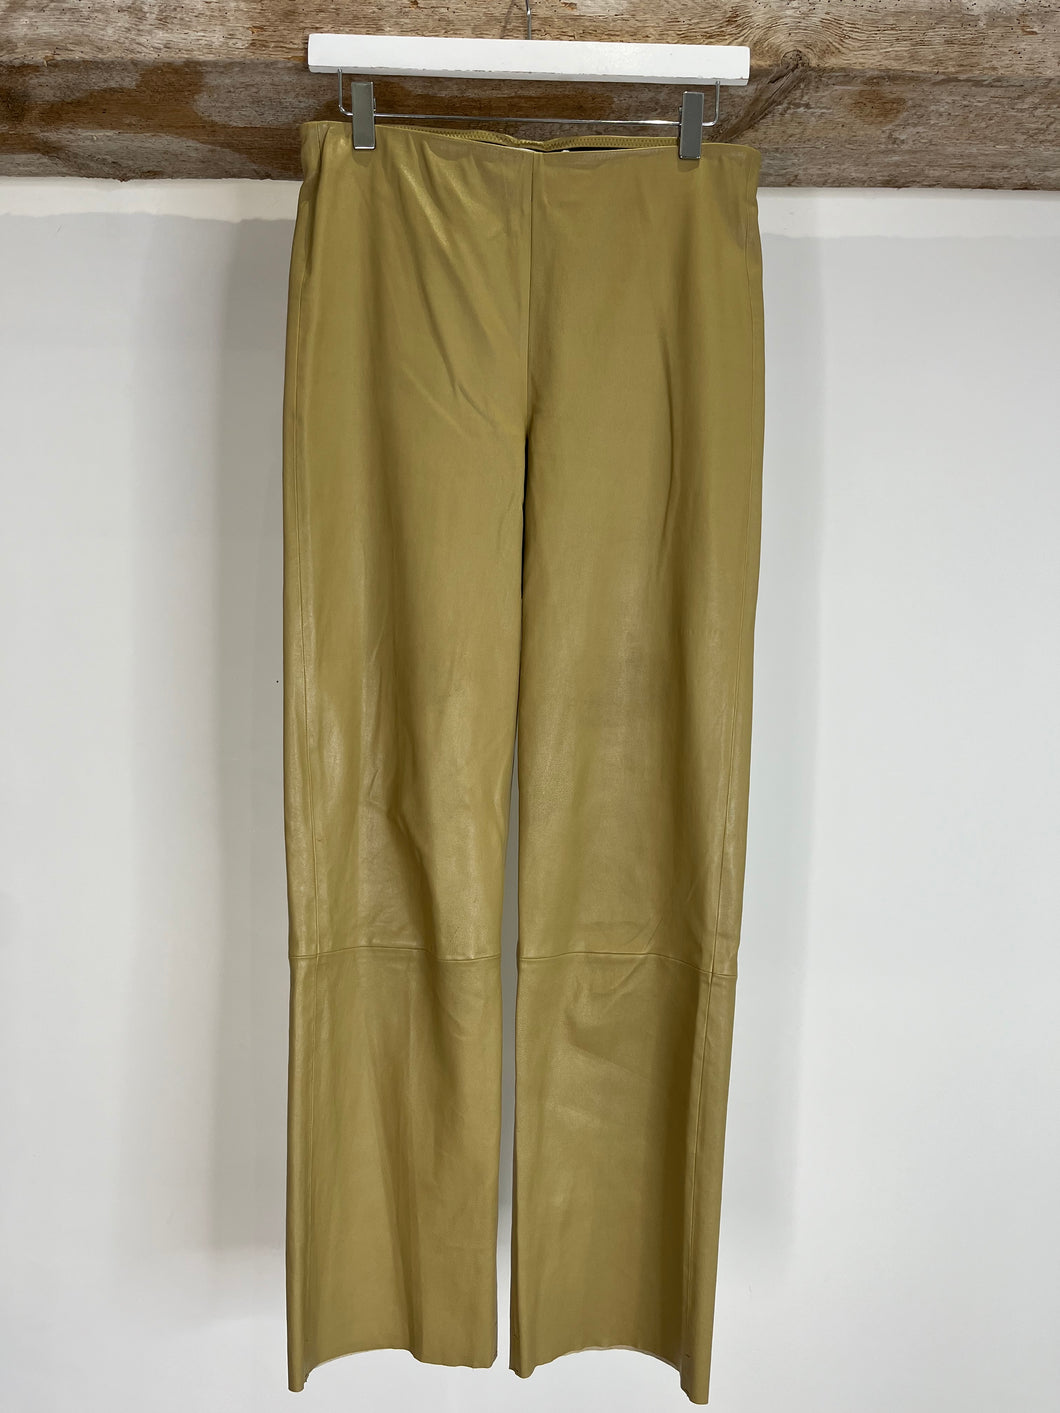 Leather Trousers - Size 38